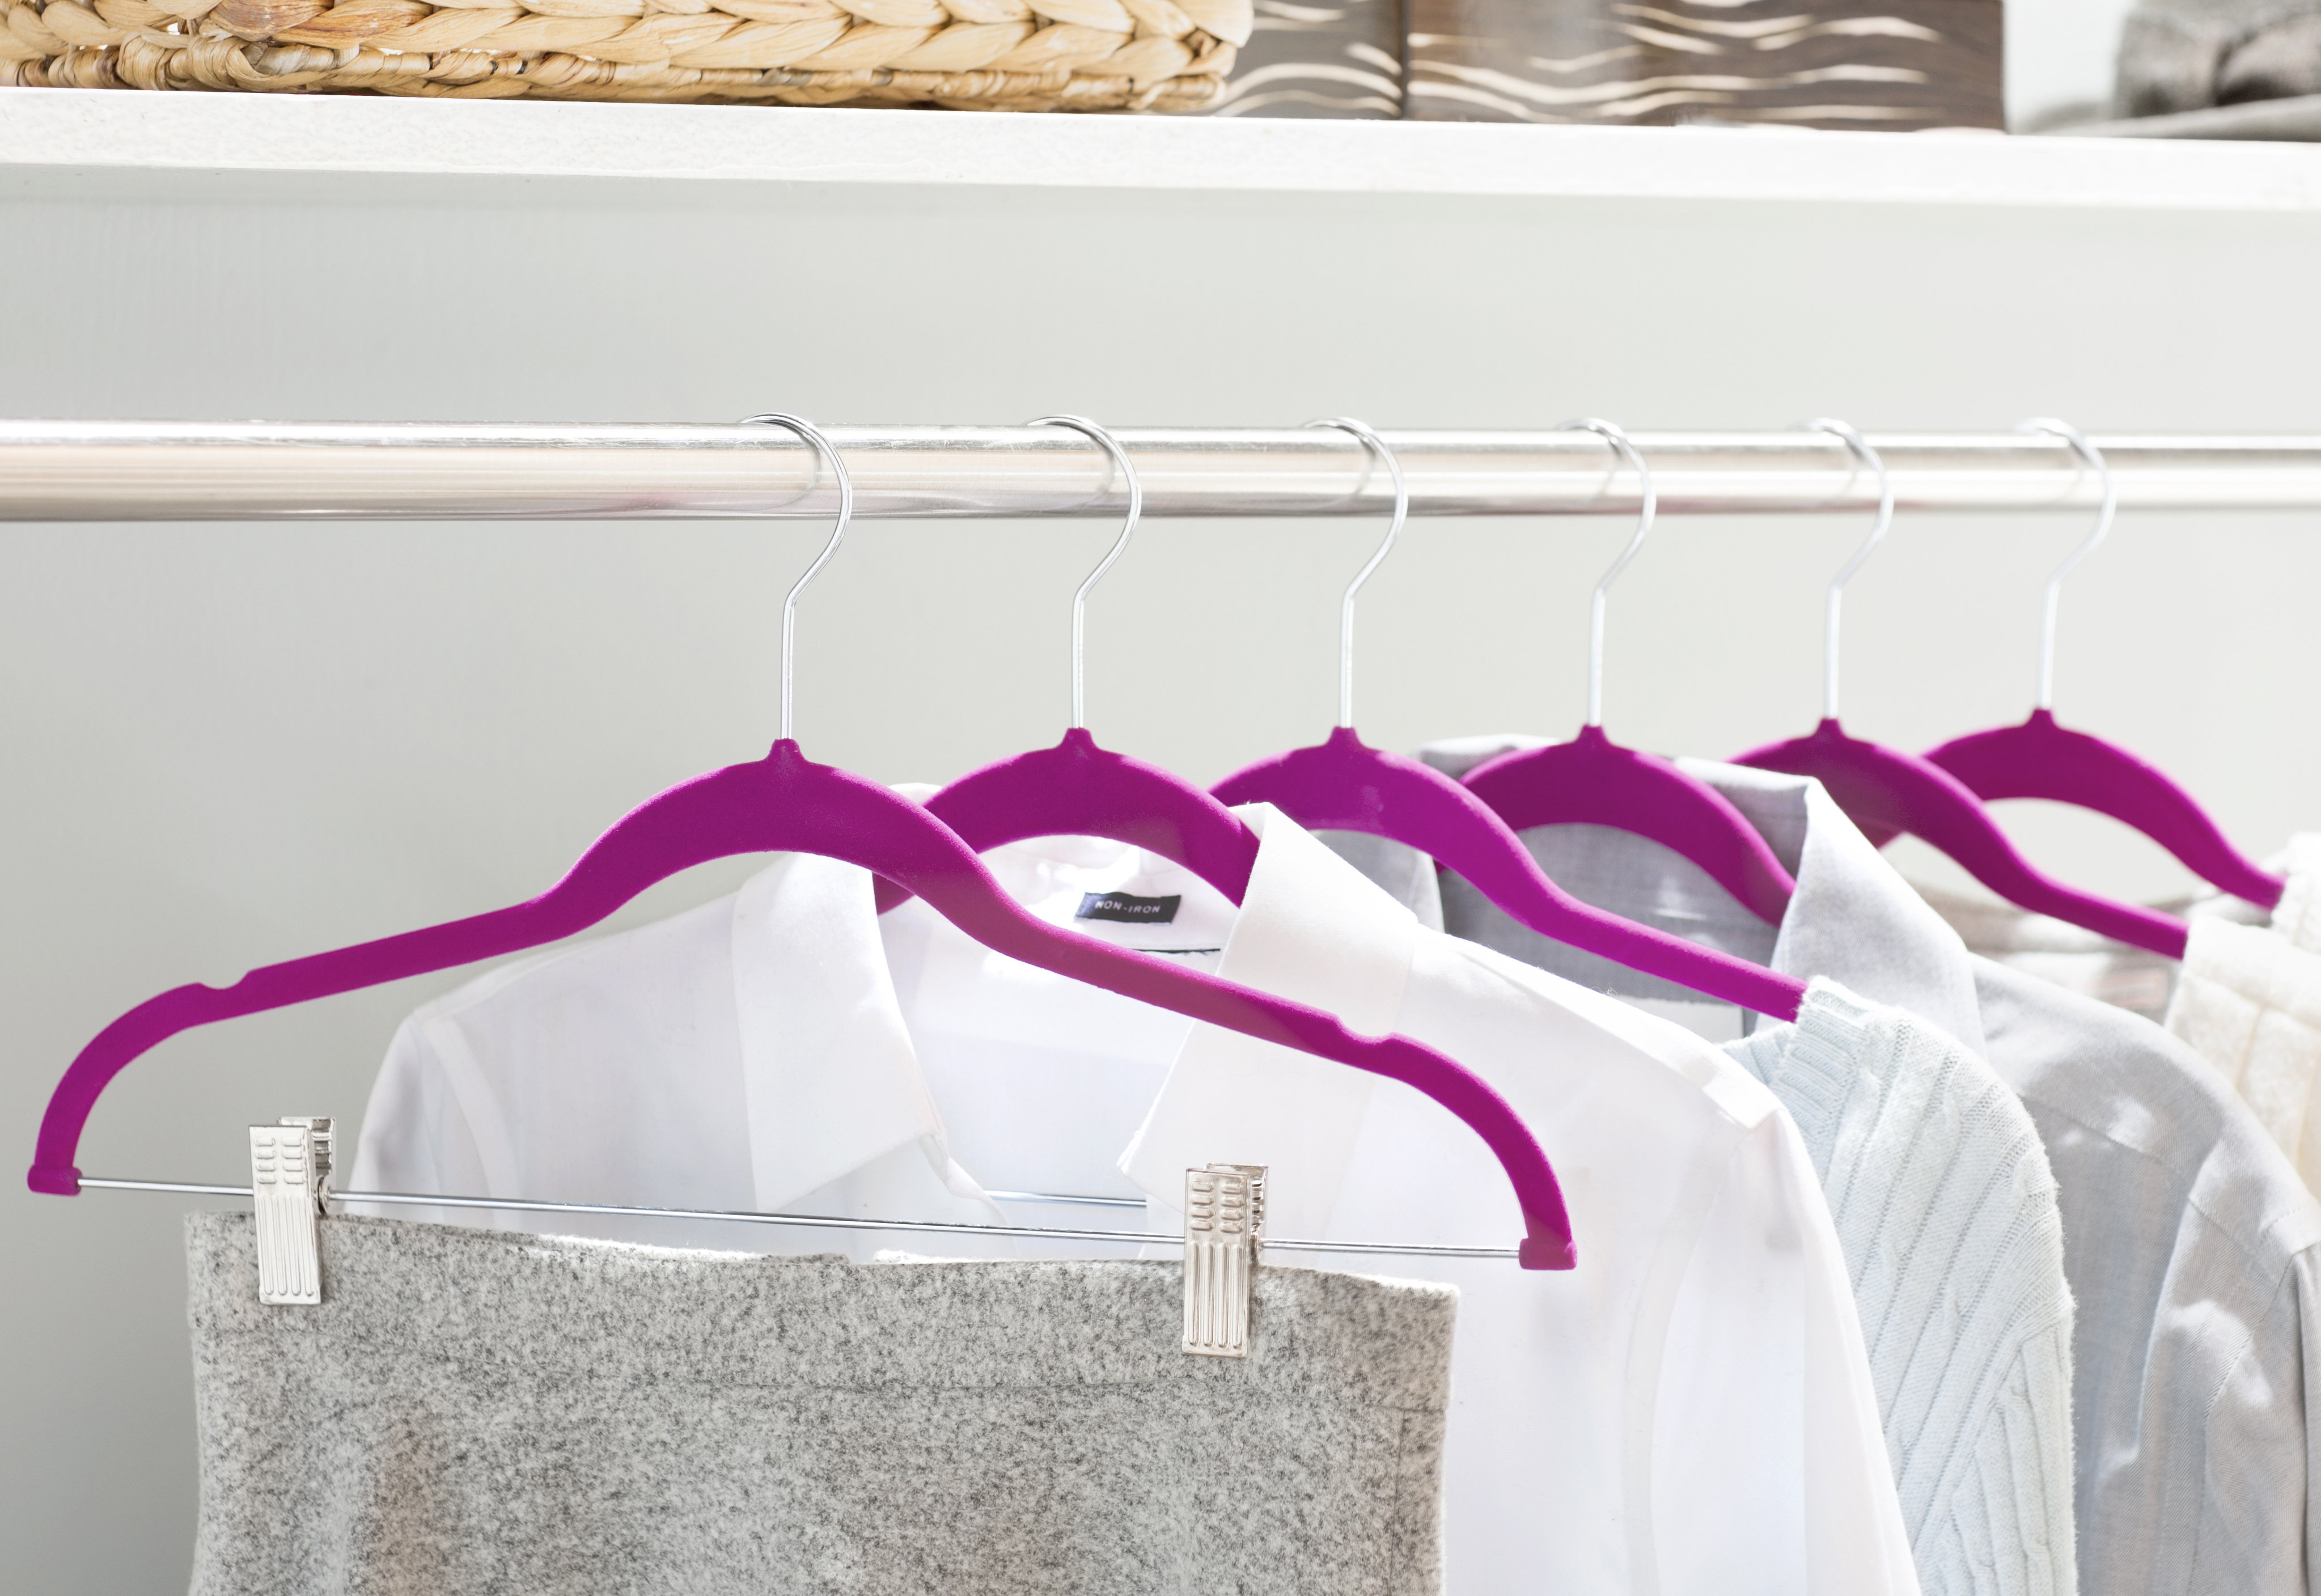 Children's Wood Hangers: Natural Low Gloss 14 Inch Top Hanger with Gripper  Inserts (100)